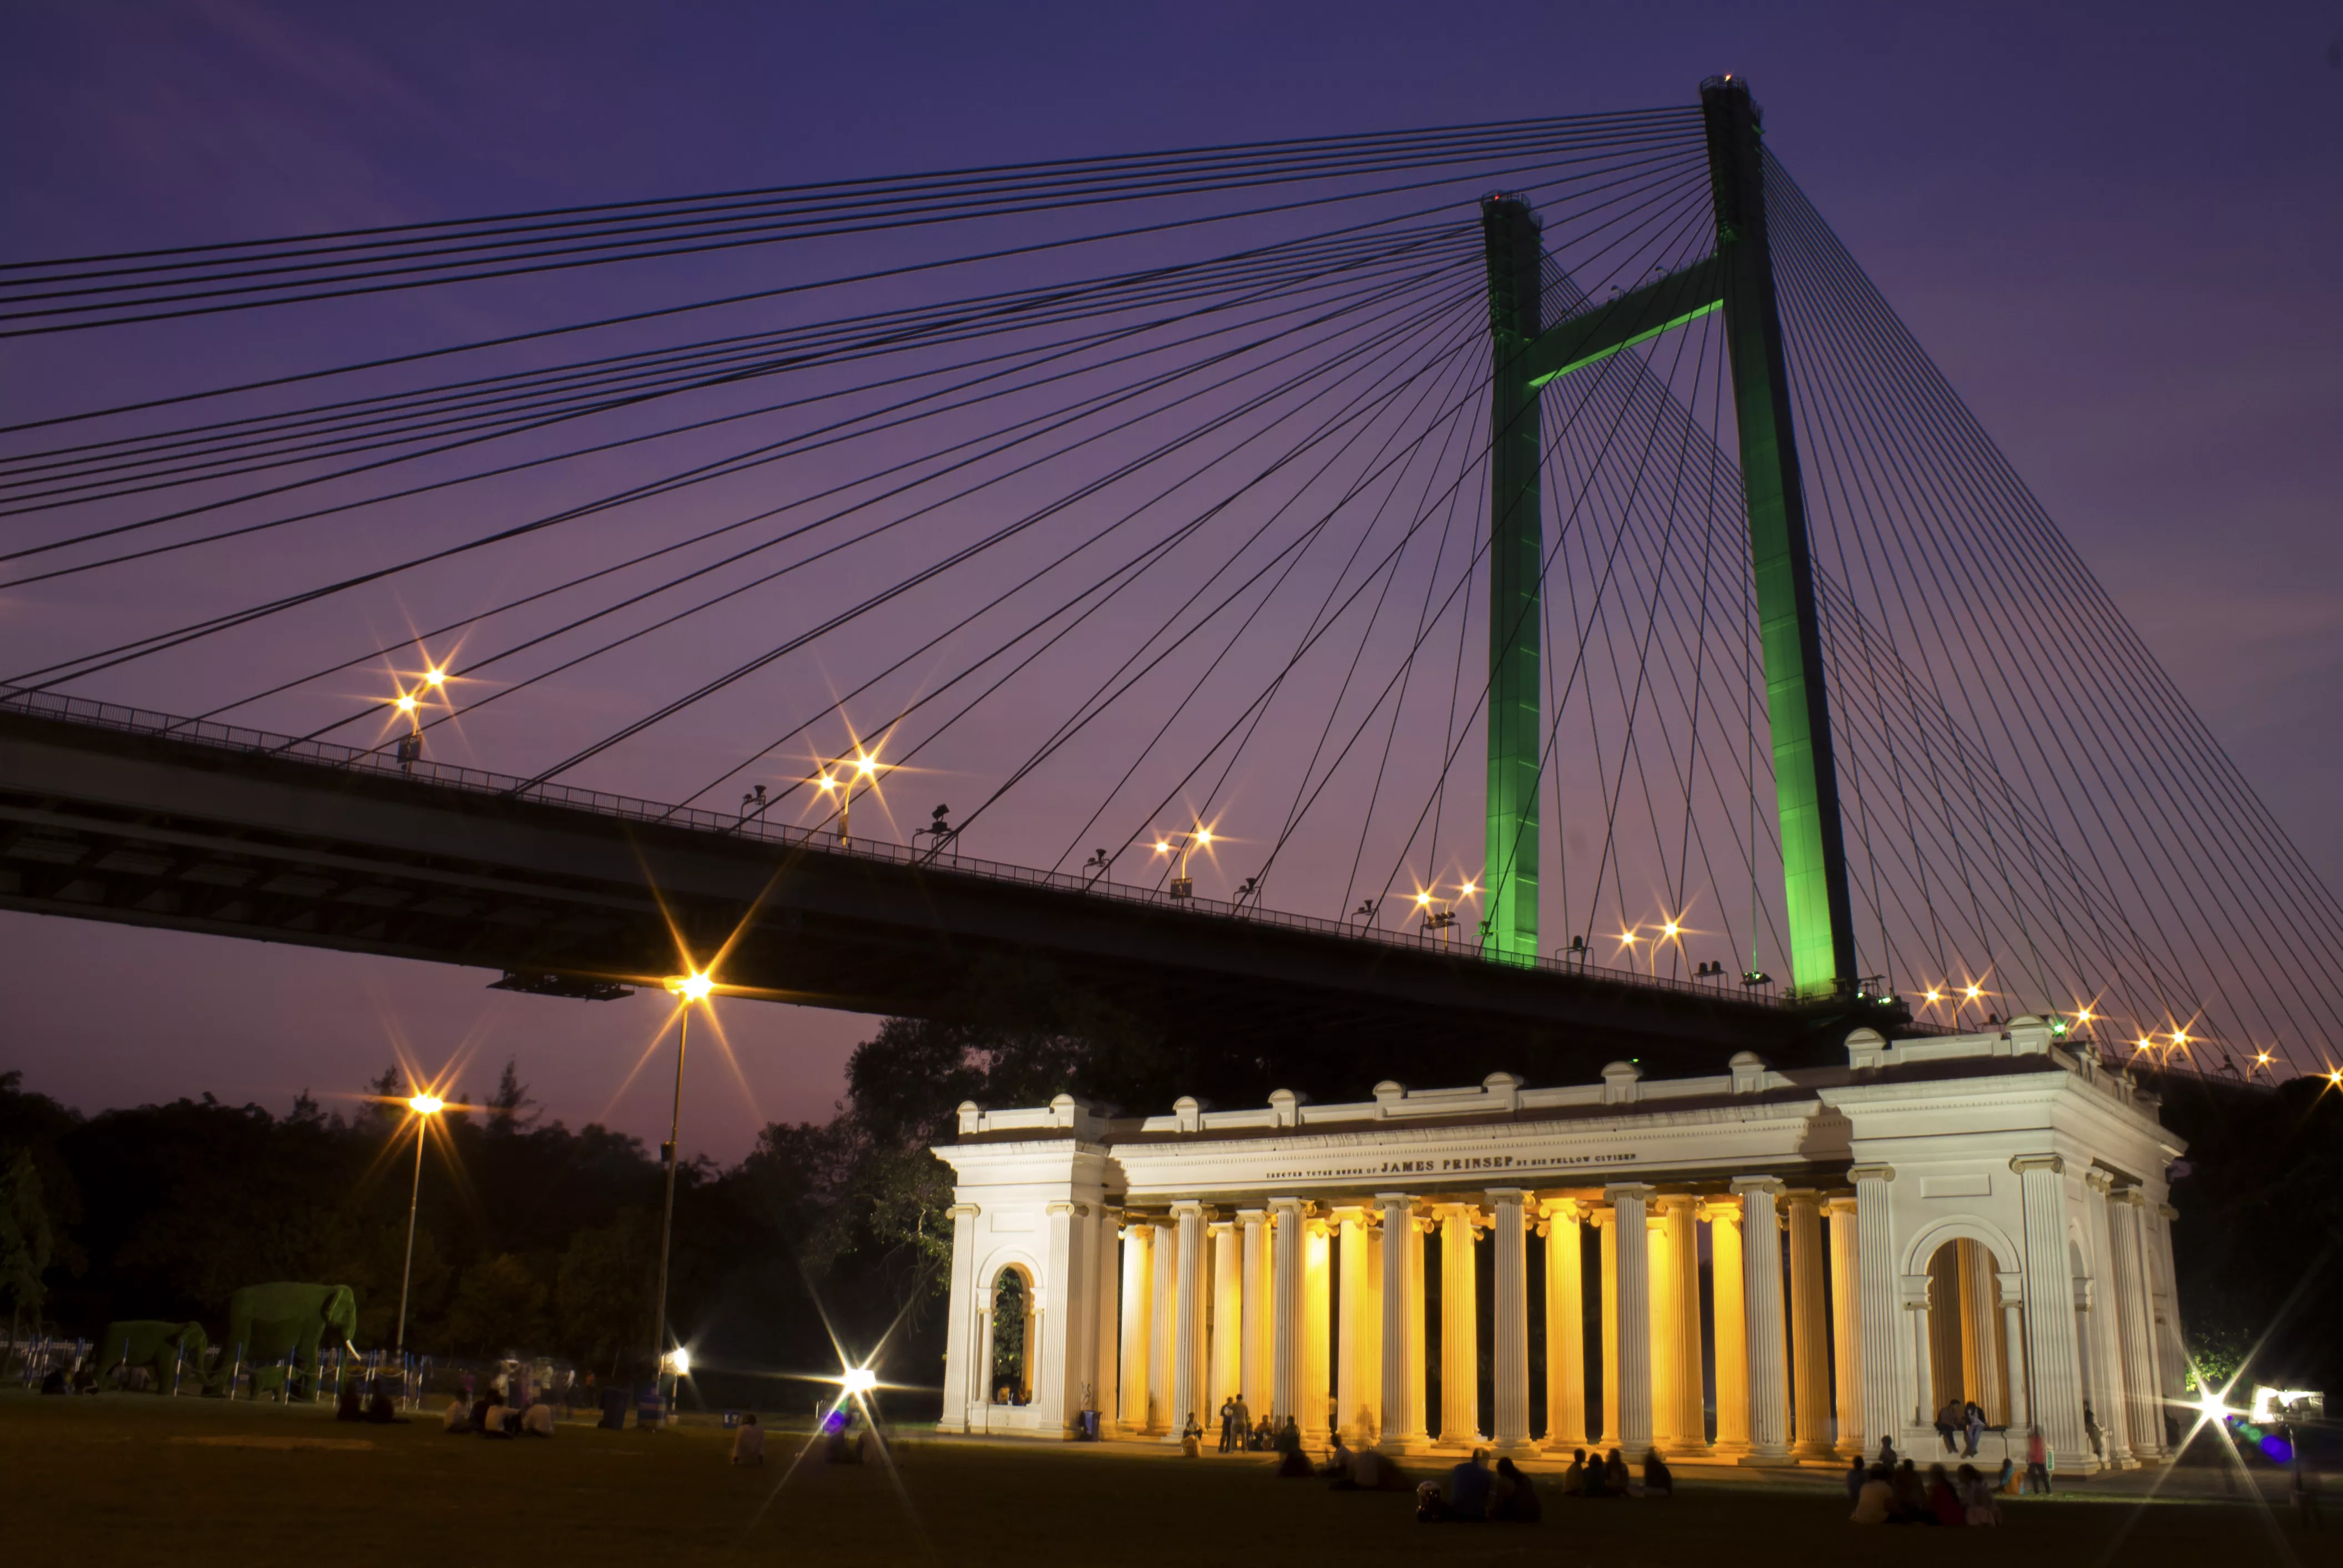 Prinsep Ghat in India, Central Asia | Architecture - Rated 4.2